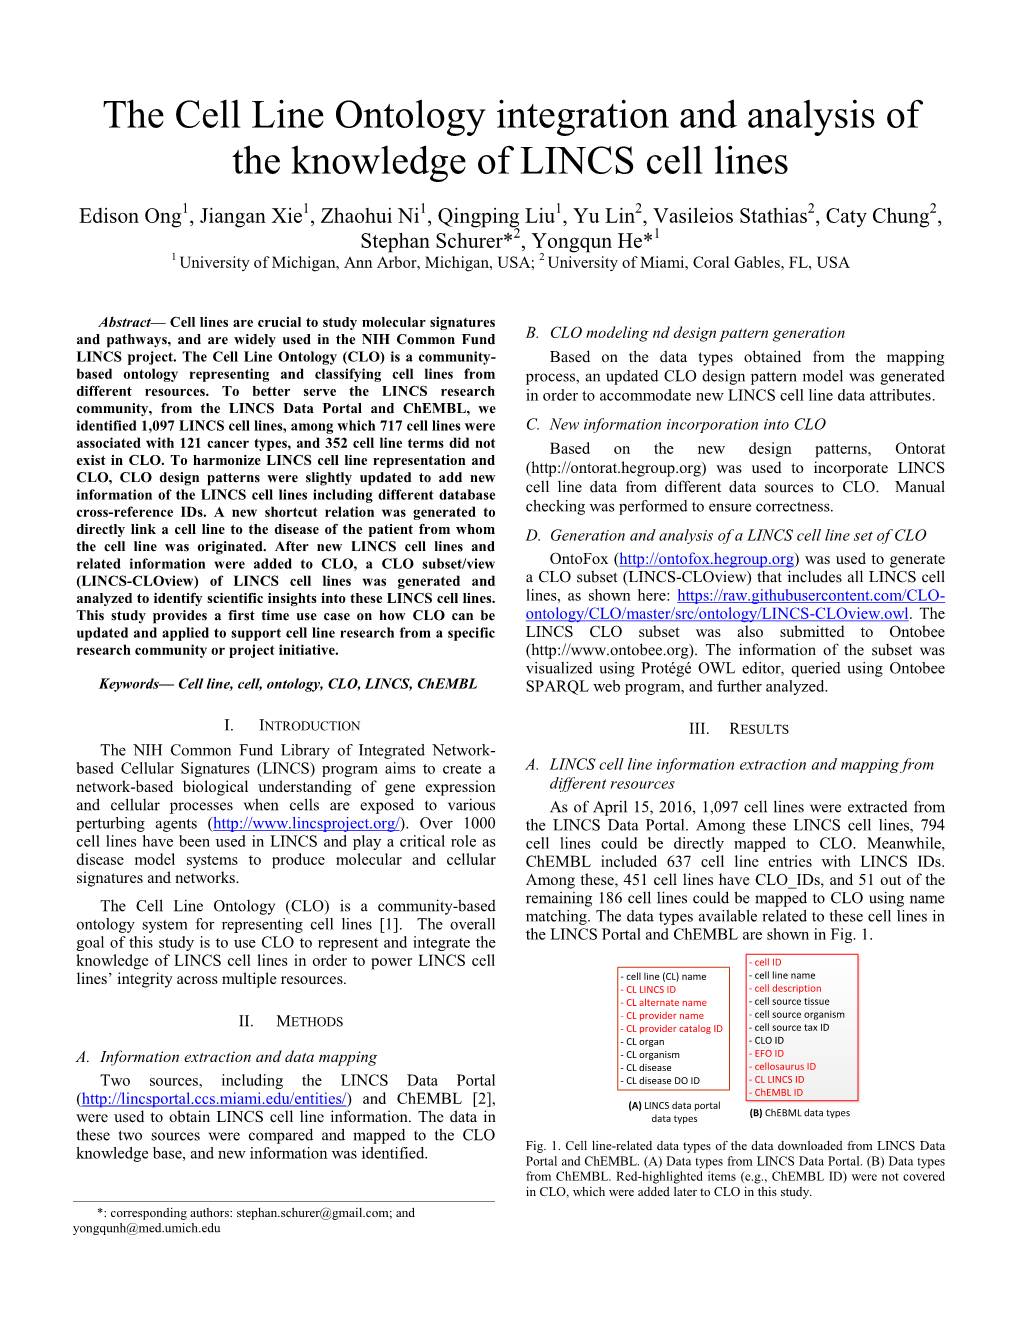 The Cell Line Ontology Integration and Analysis of the Knowledge of LINCS Cell Lines